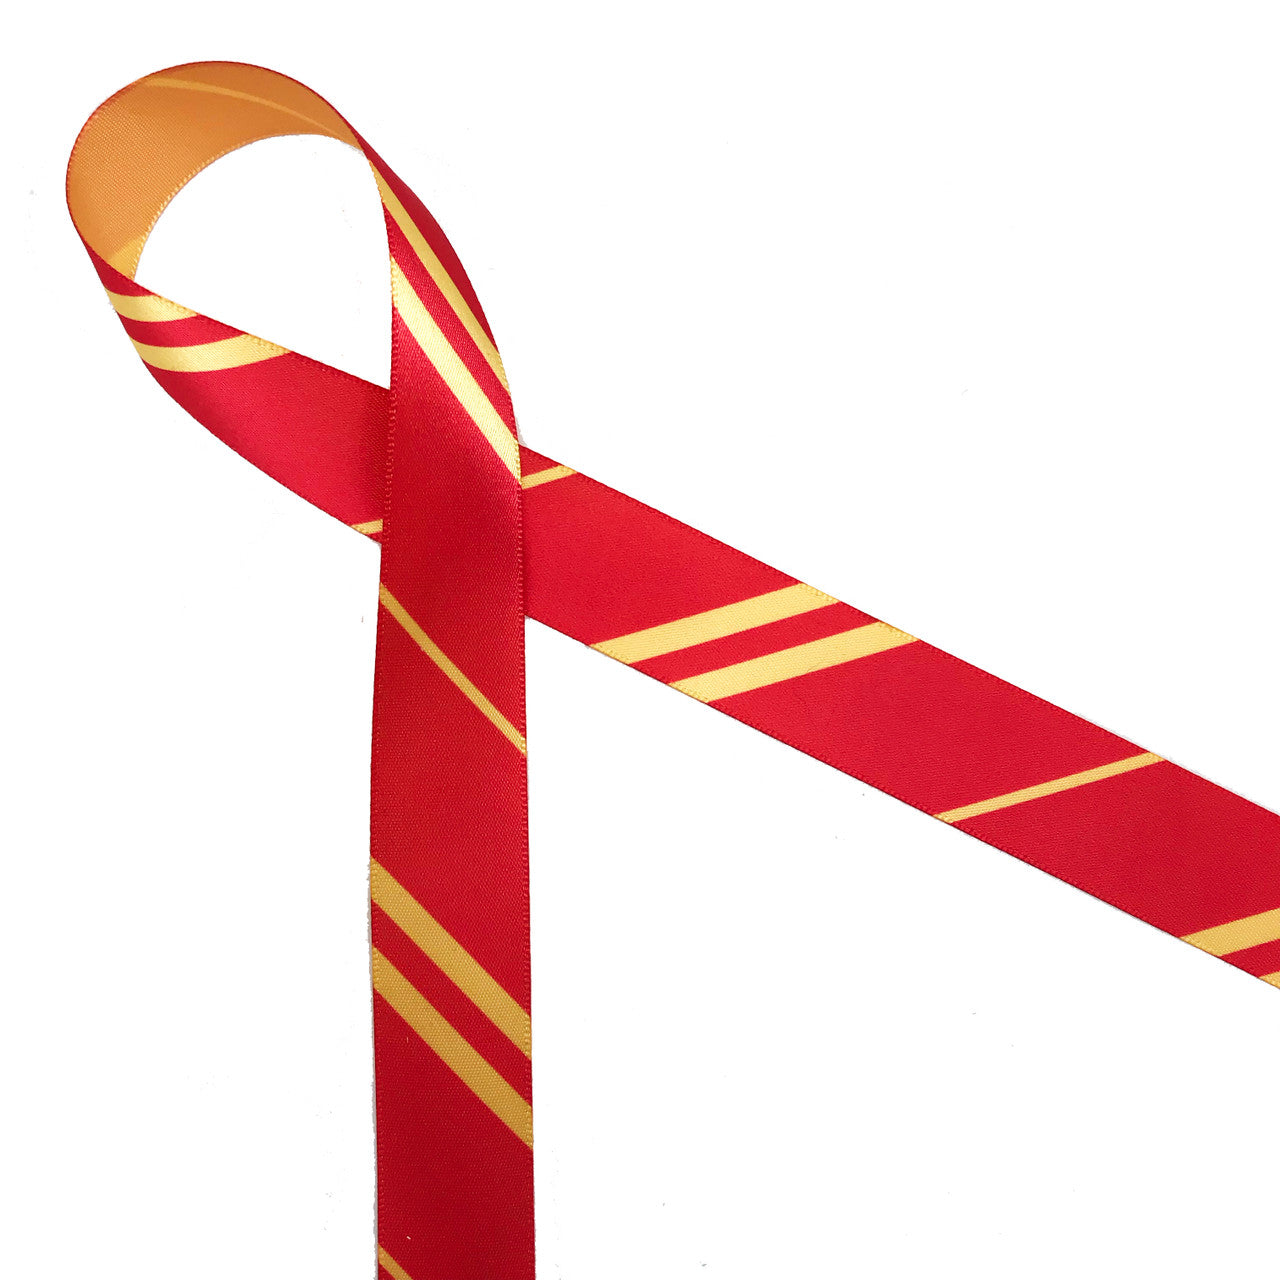 Wizard Ribbon Stripes red and gold printed on 7/8" gold single face satin